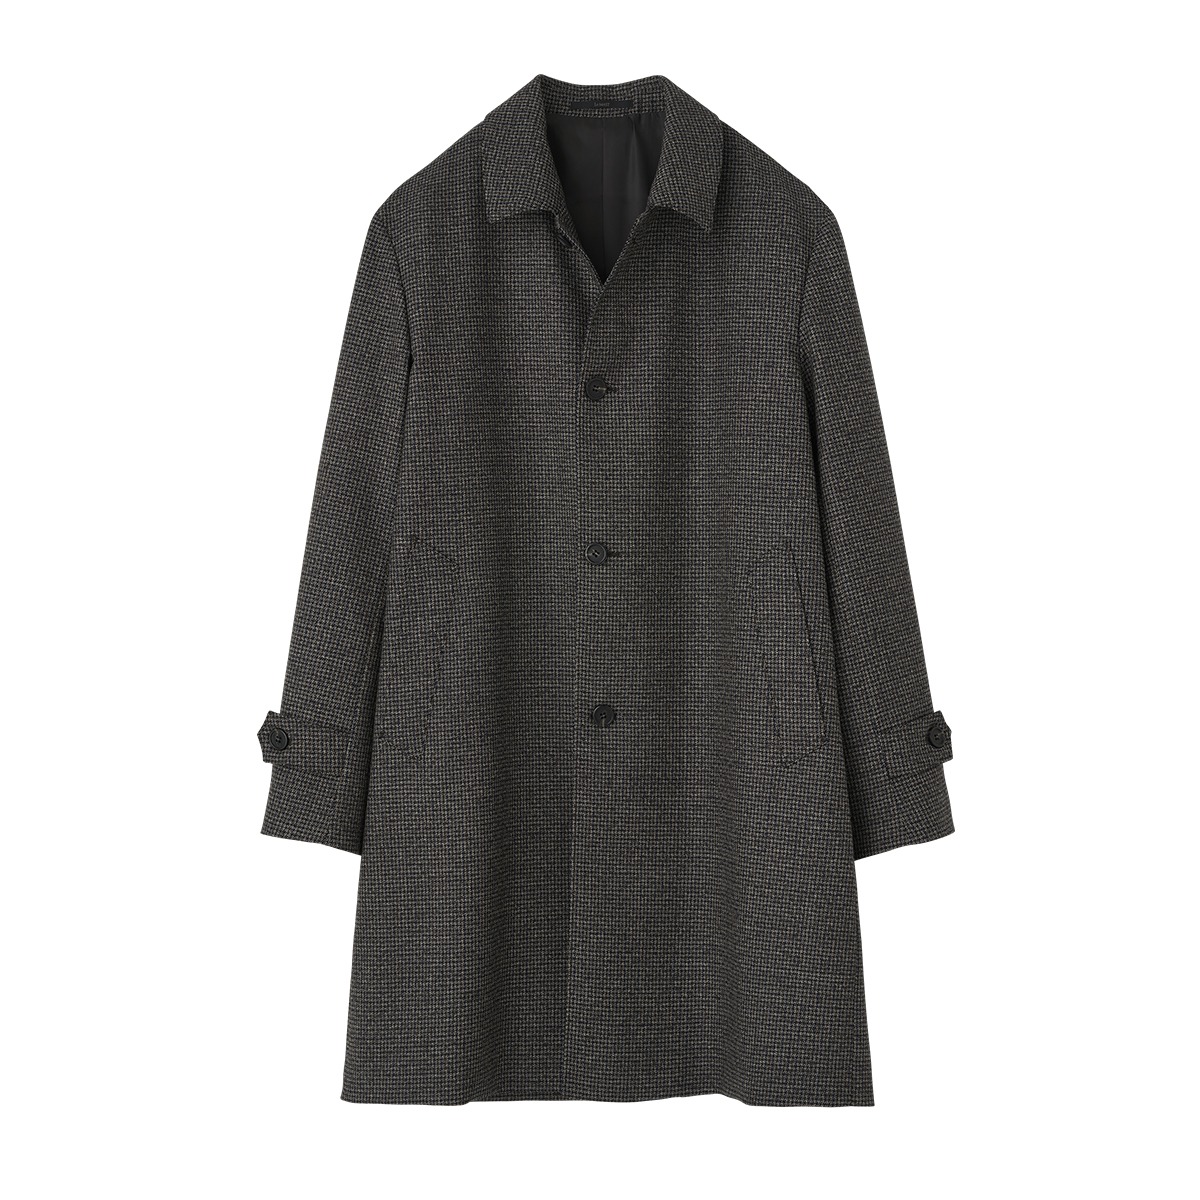 Grey Hound tooth Check Trench Coat